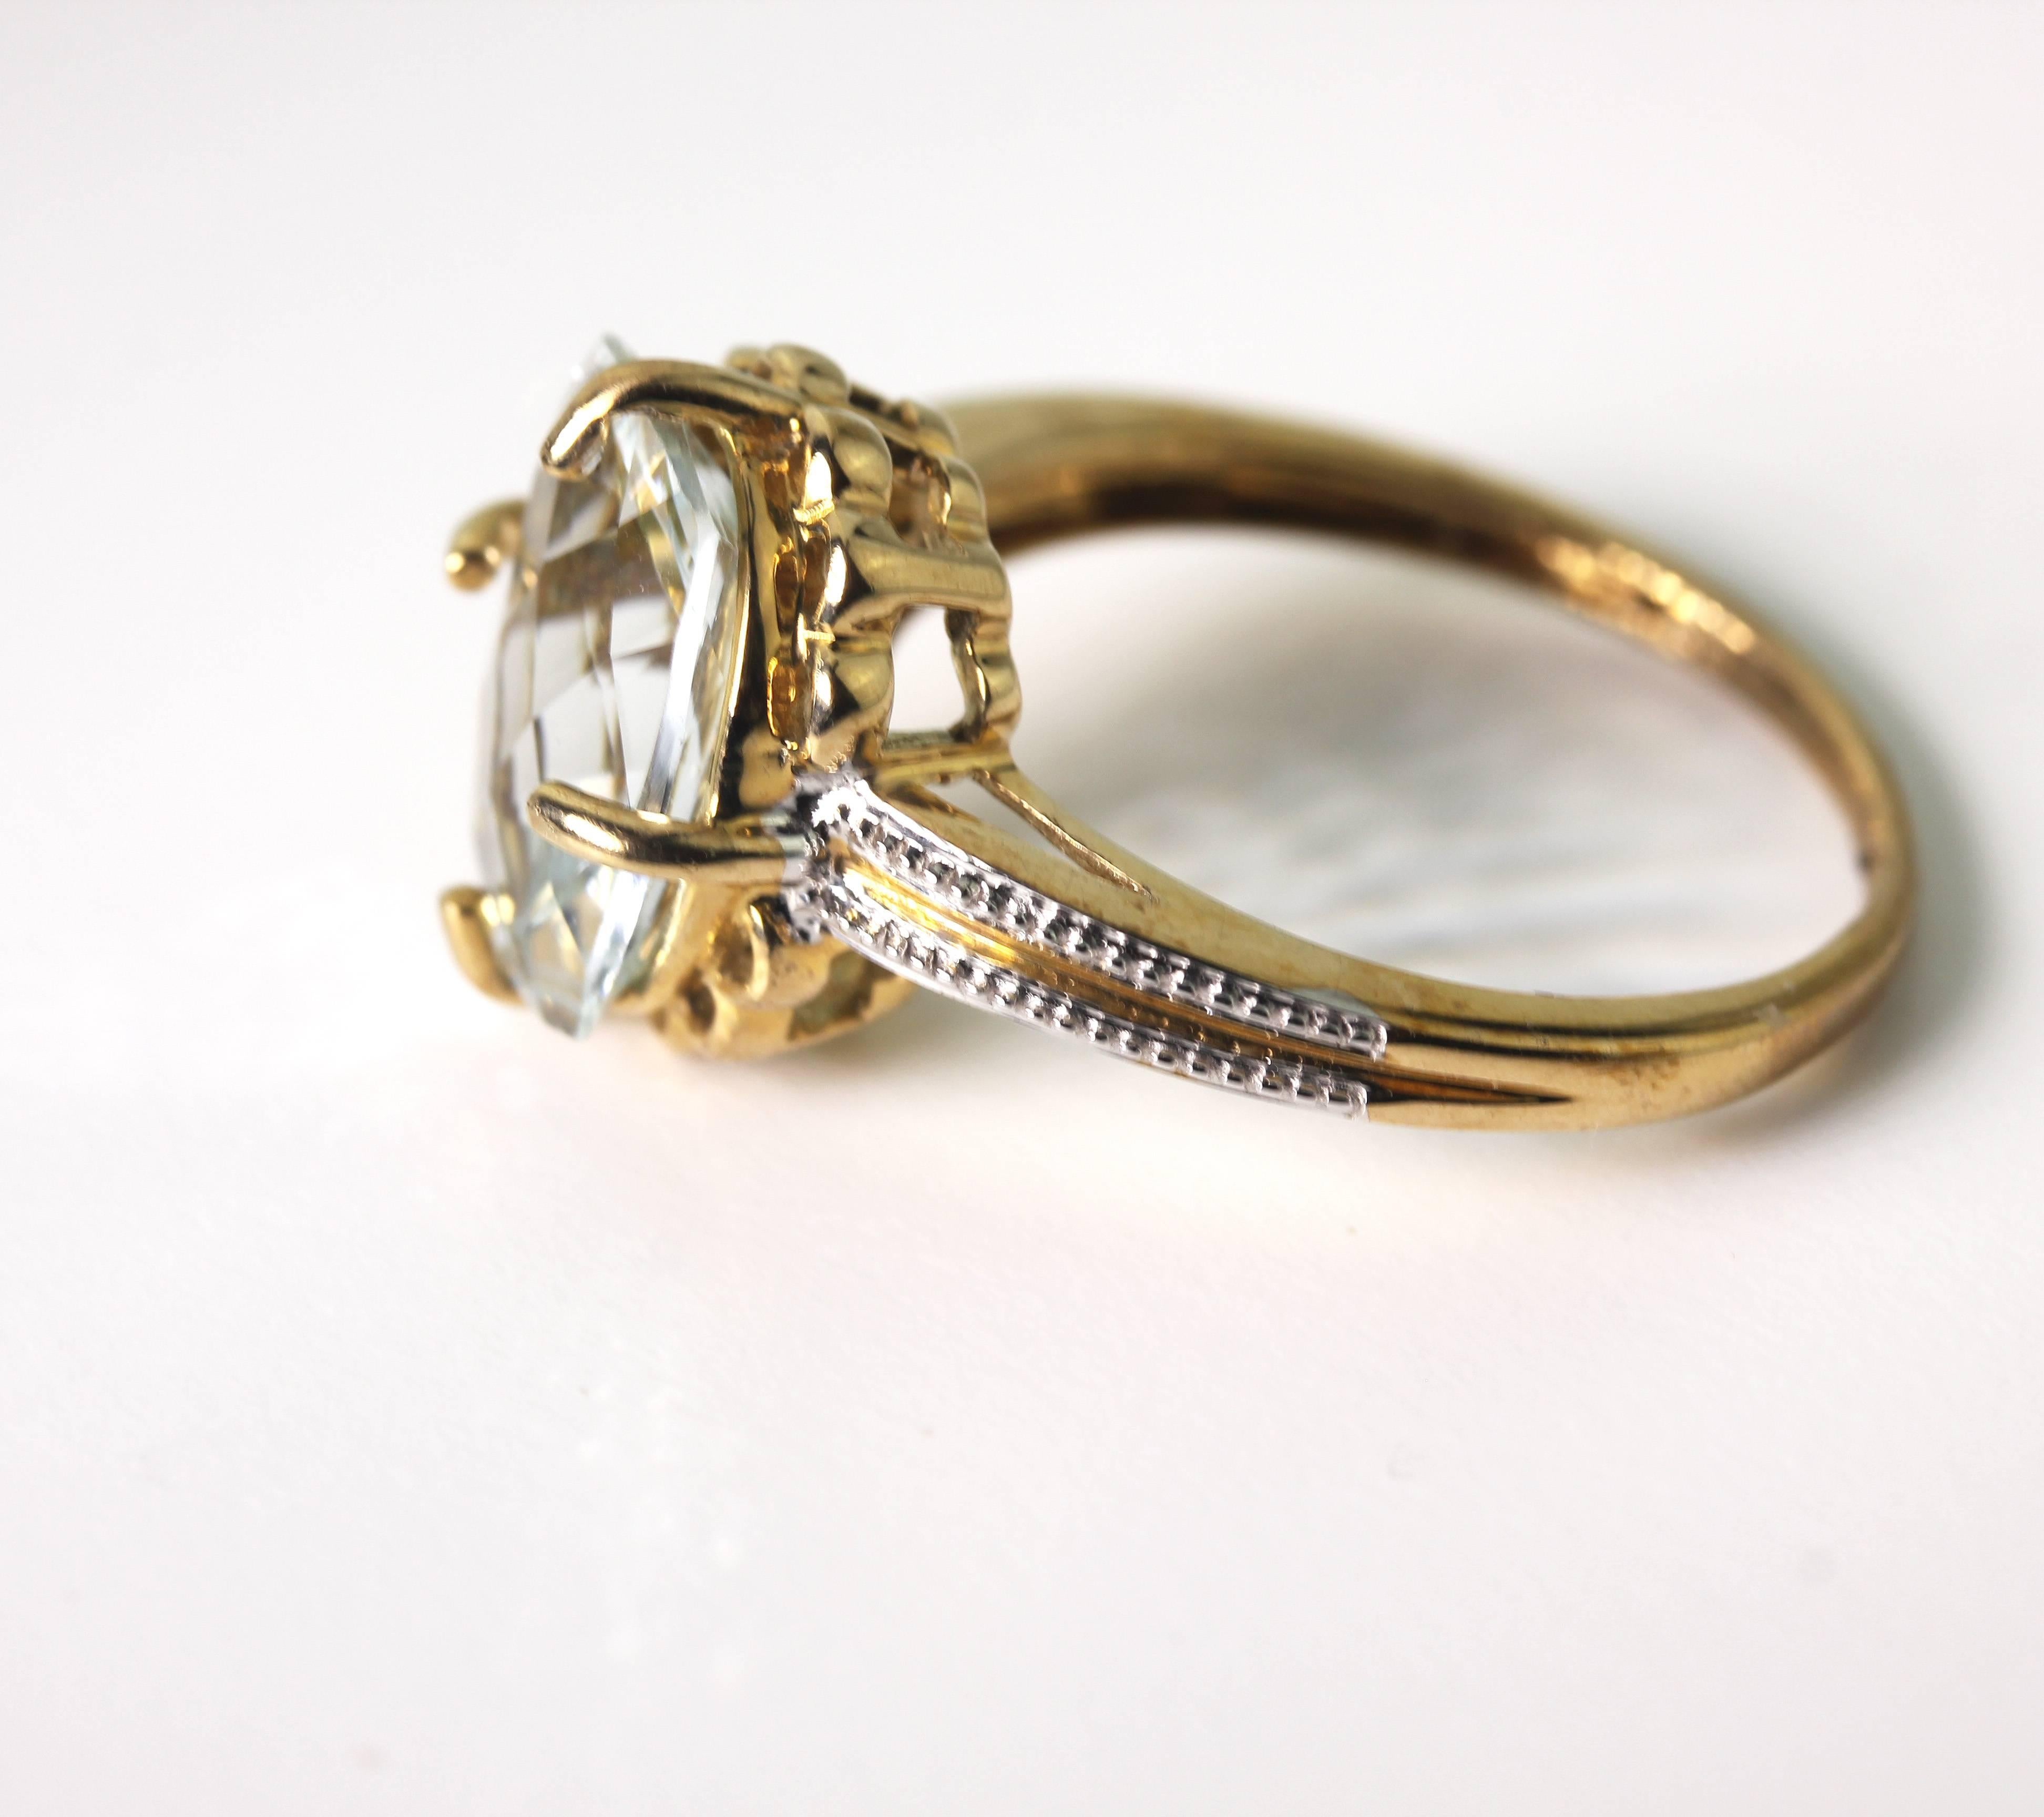 This beautiful sparkling 2.78 Carat eye clean Aquamarine is set in a unique 10 KT yellow gold (enhanced with decorations of white gold) ring size 7. (the ring is sizable)  More from this seller by putting gemjunky into 1stdibs search bar.